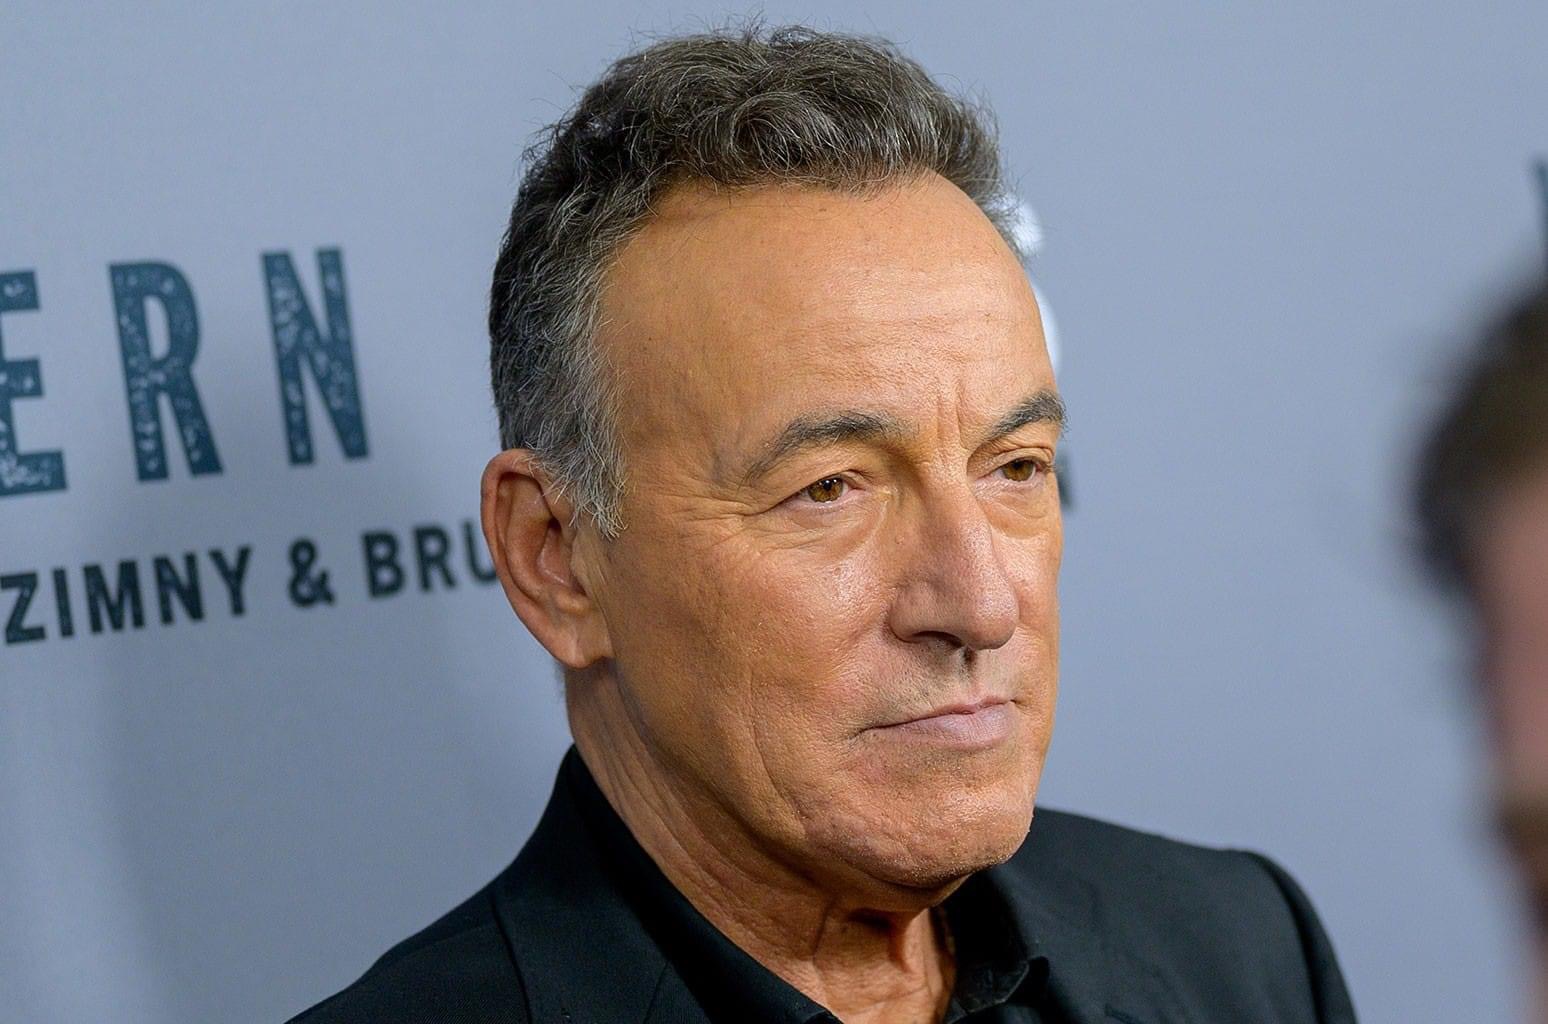 Rock and roll Hall of Fame denies Bruce Springsteen any awards or status this year.  “He’s just too woke for regular America.”